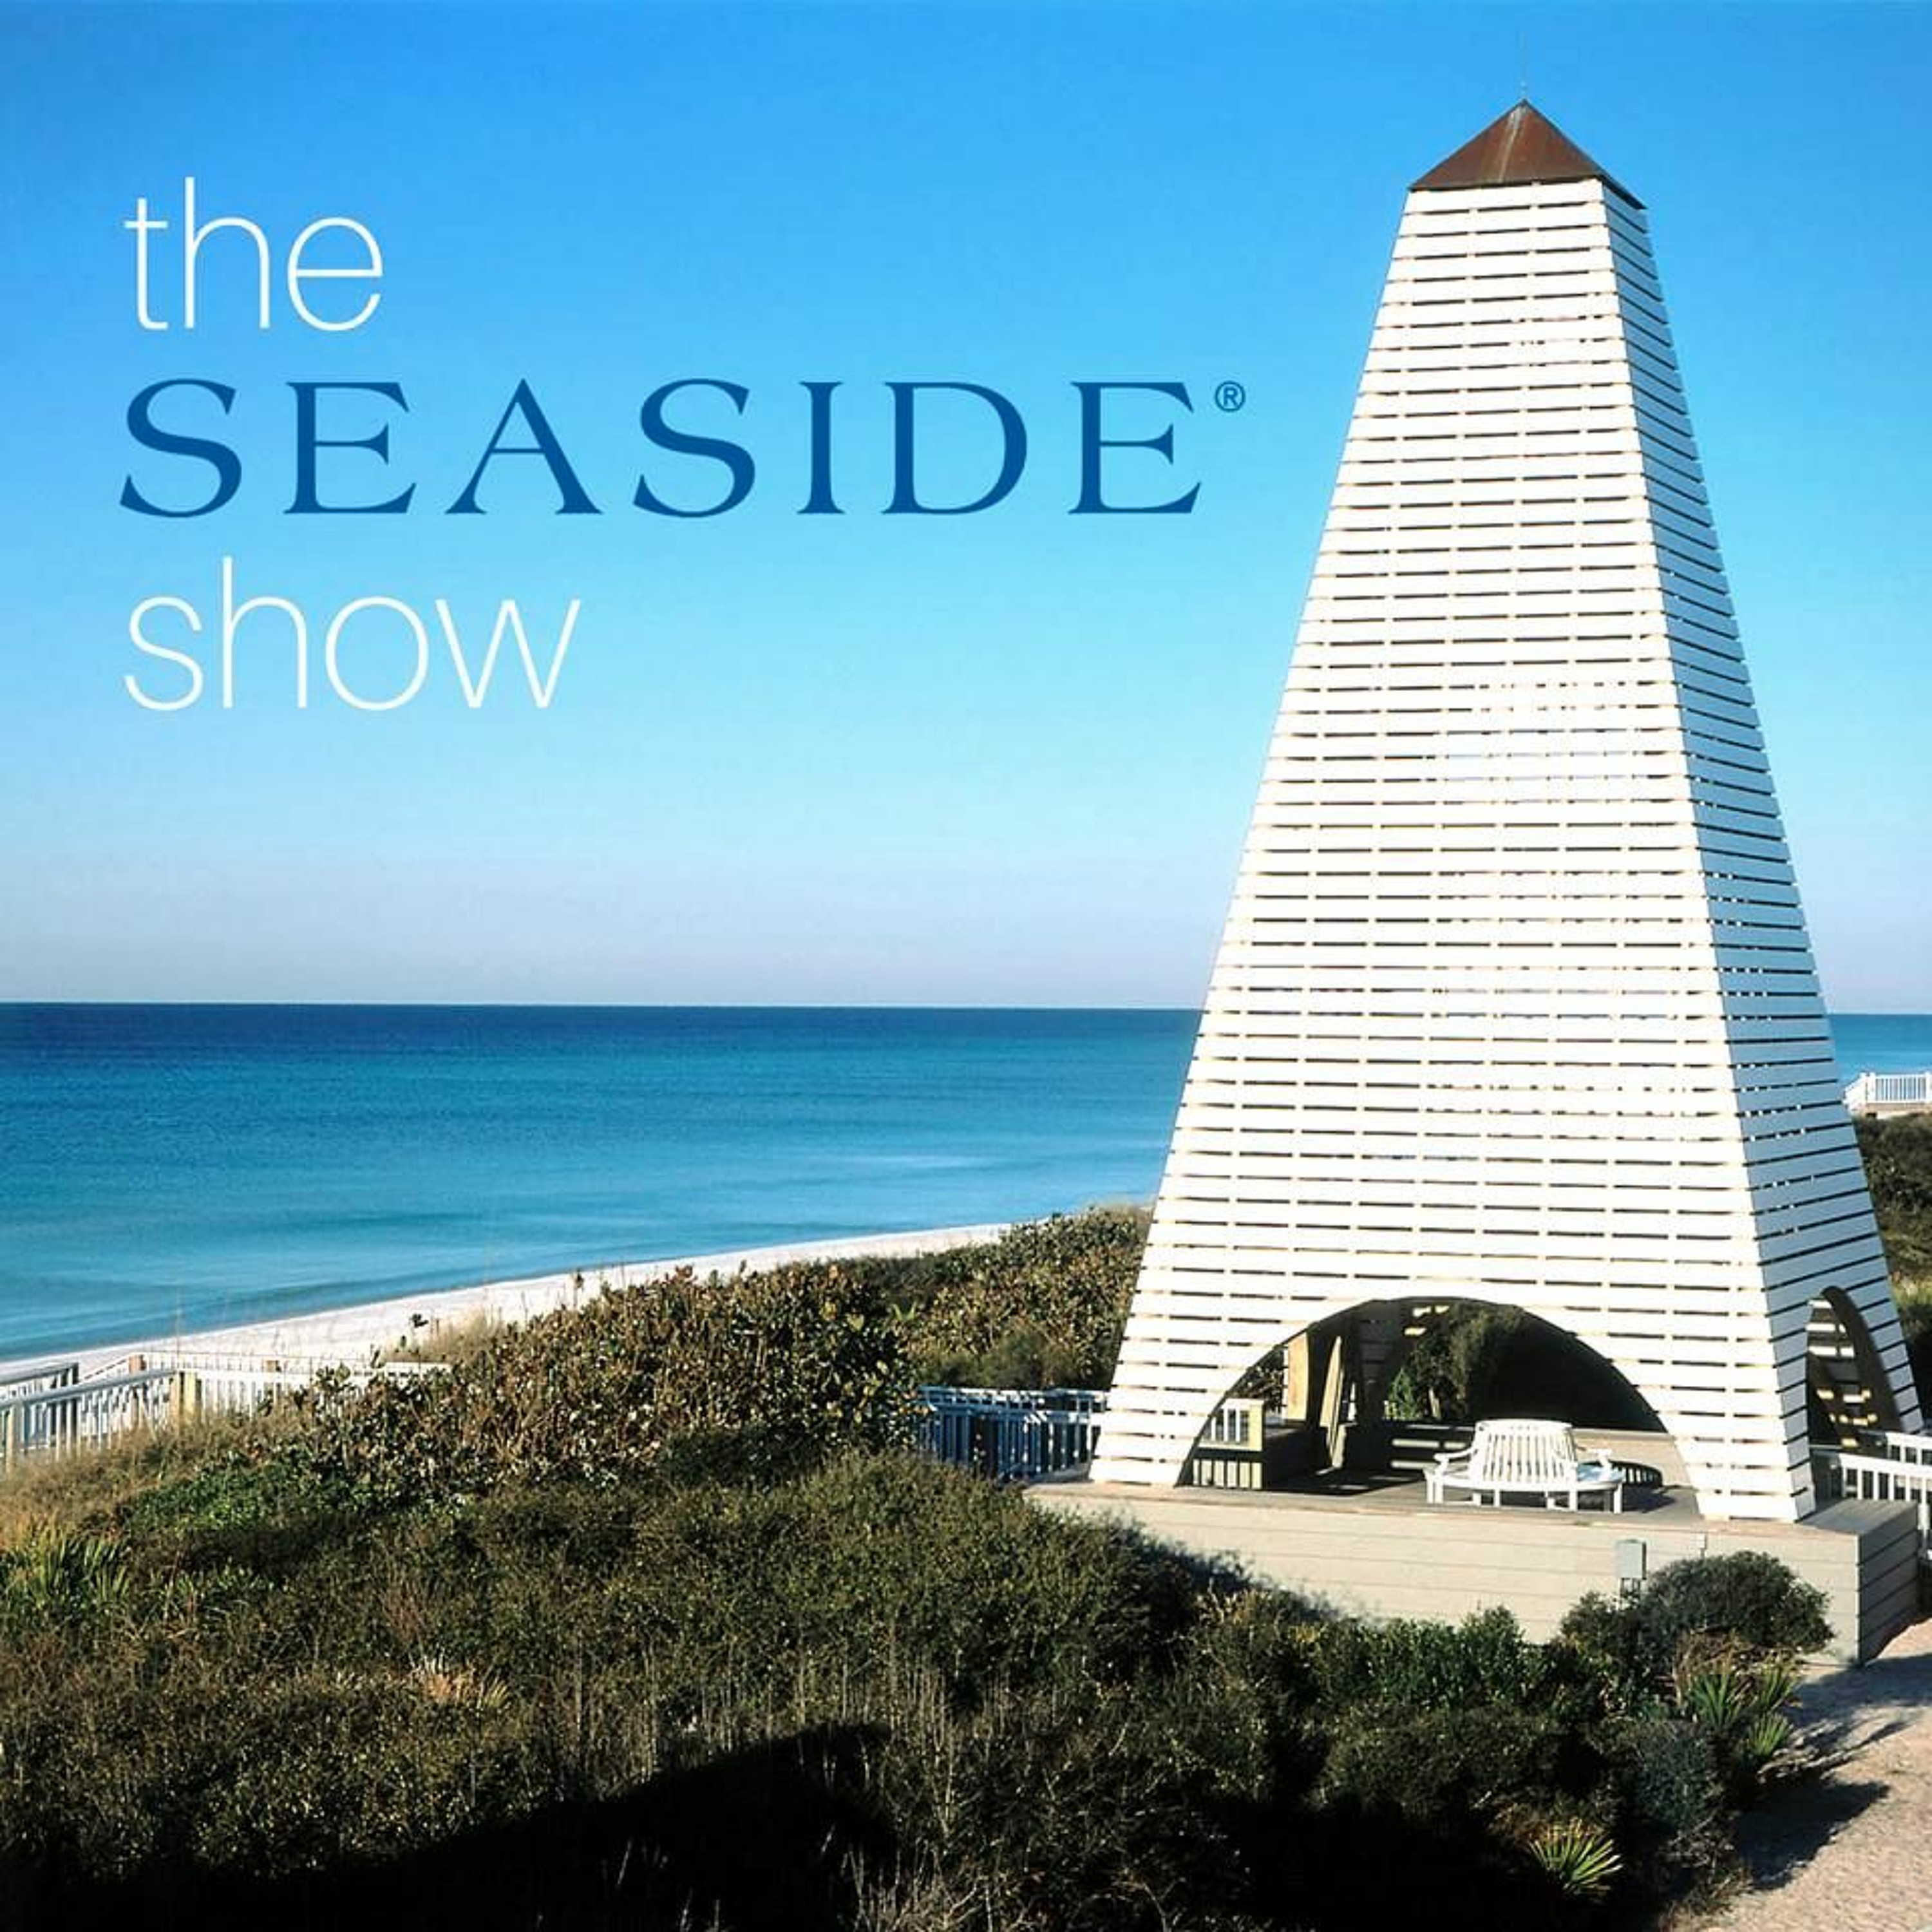 The Seaside Show: Spring is in the Air